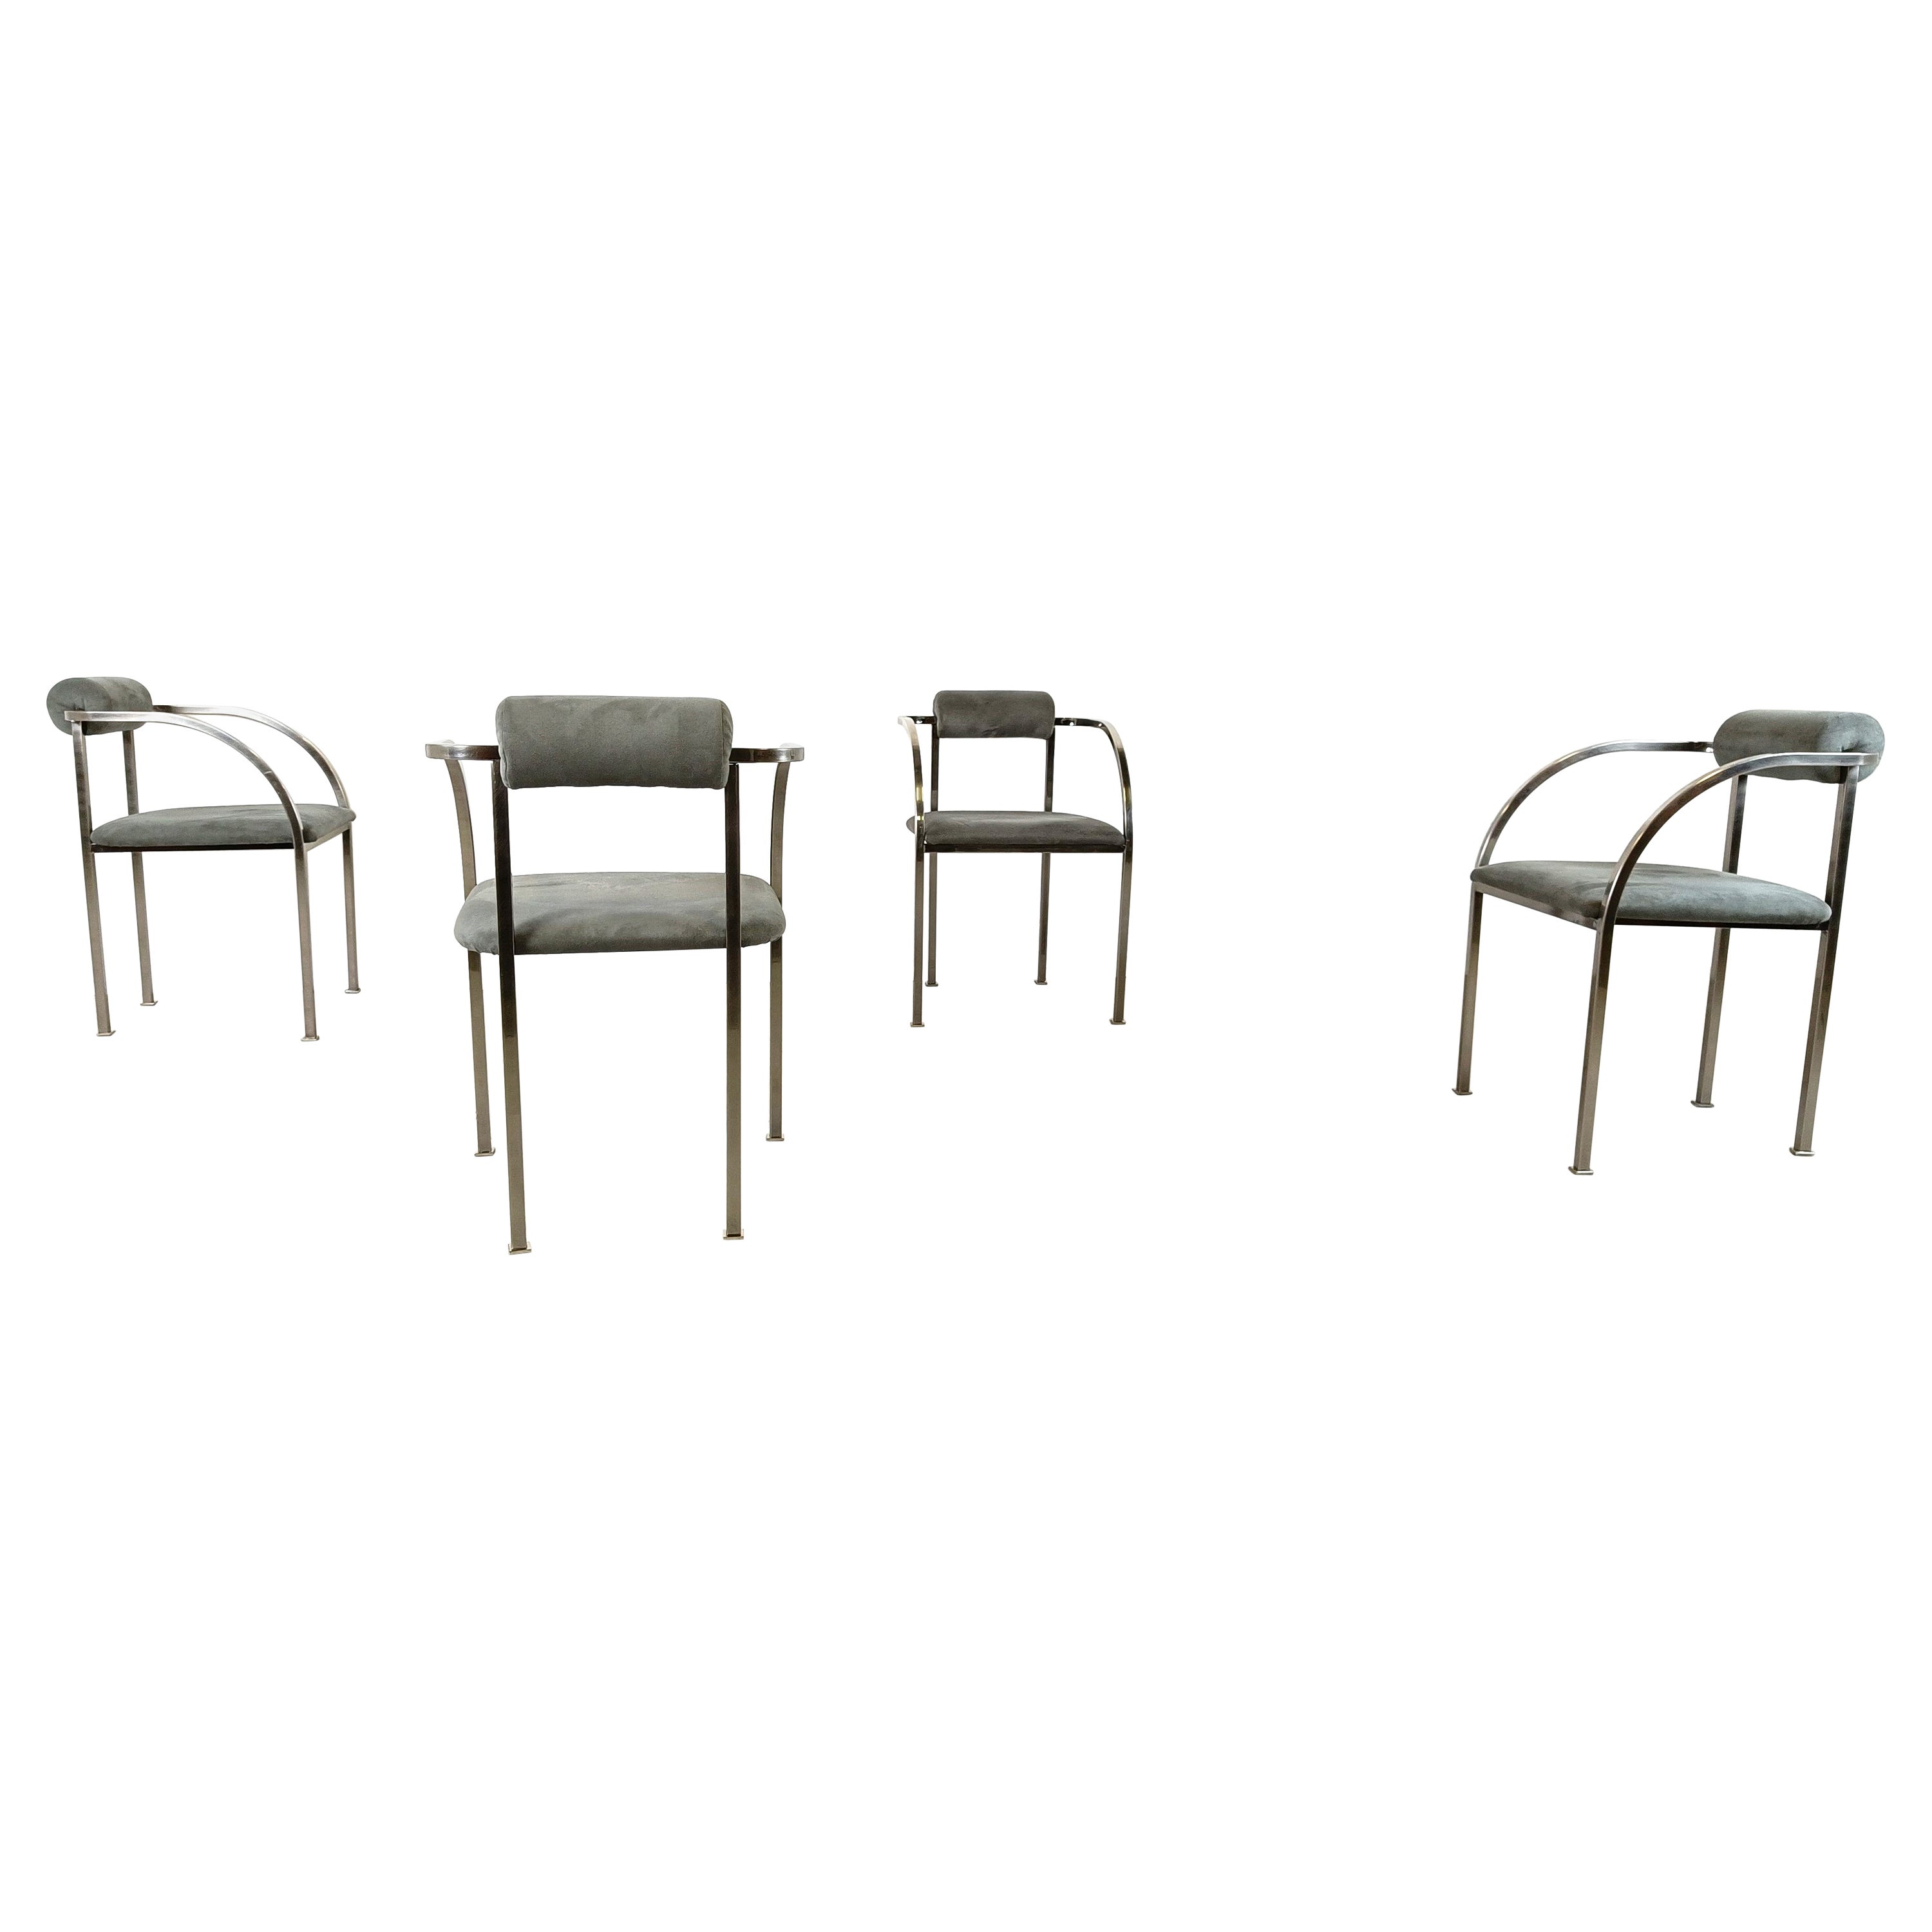 Post modern dining chairs by Belgo chrom, set of 4 - 1980s For Sale